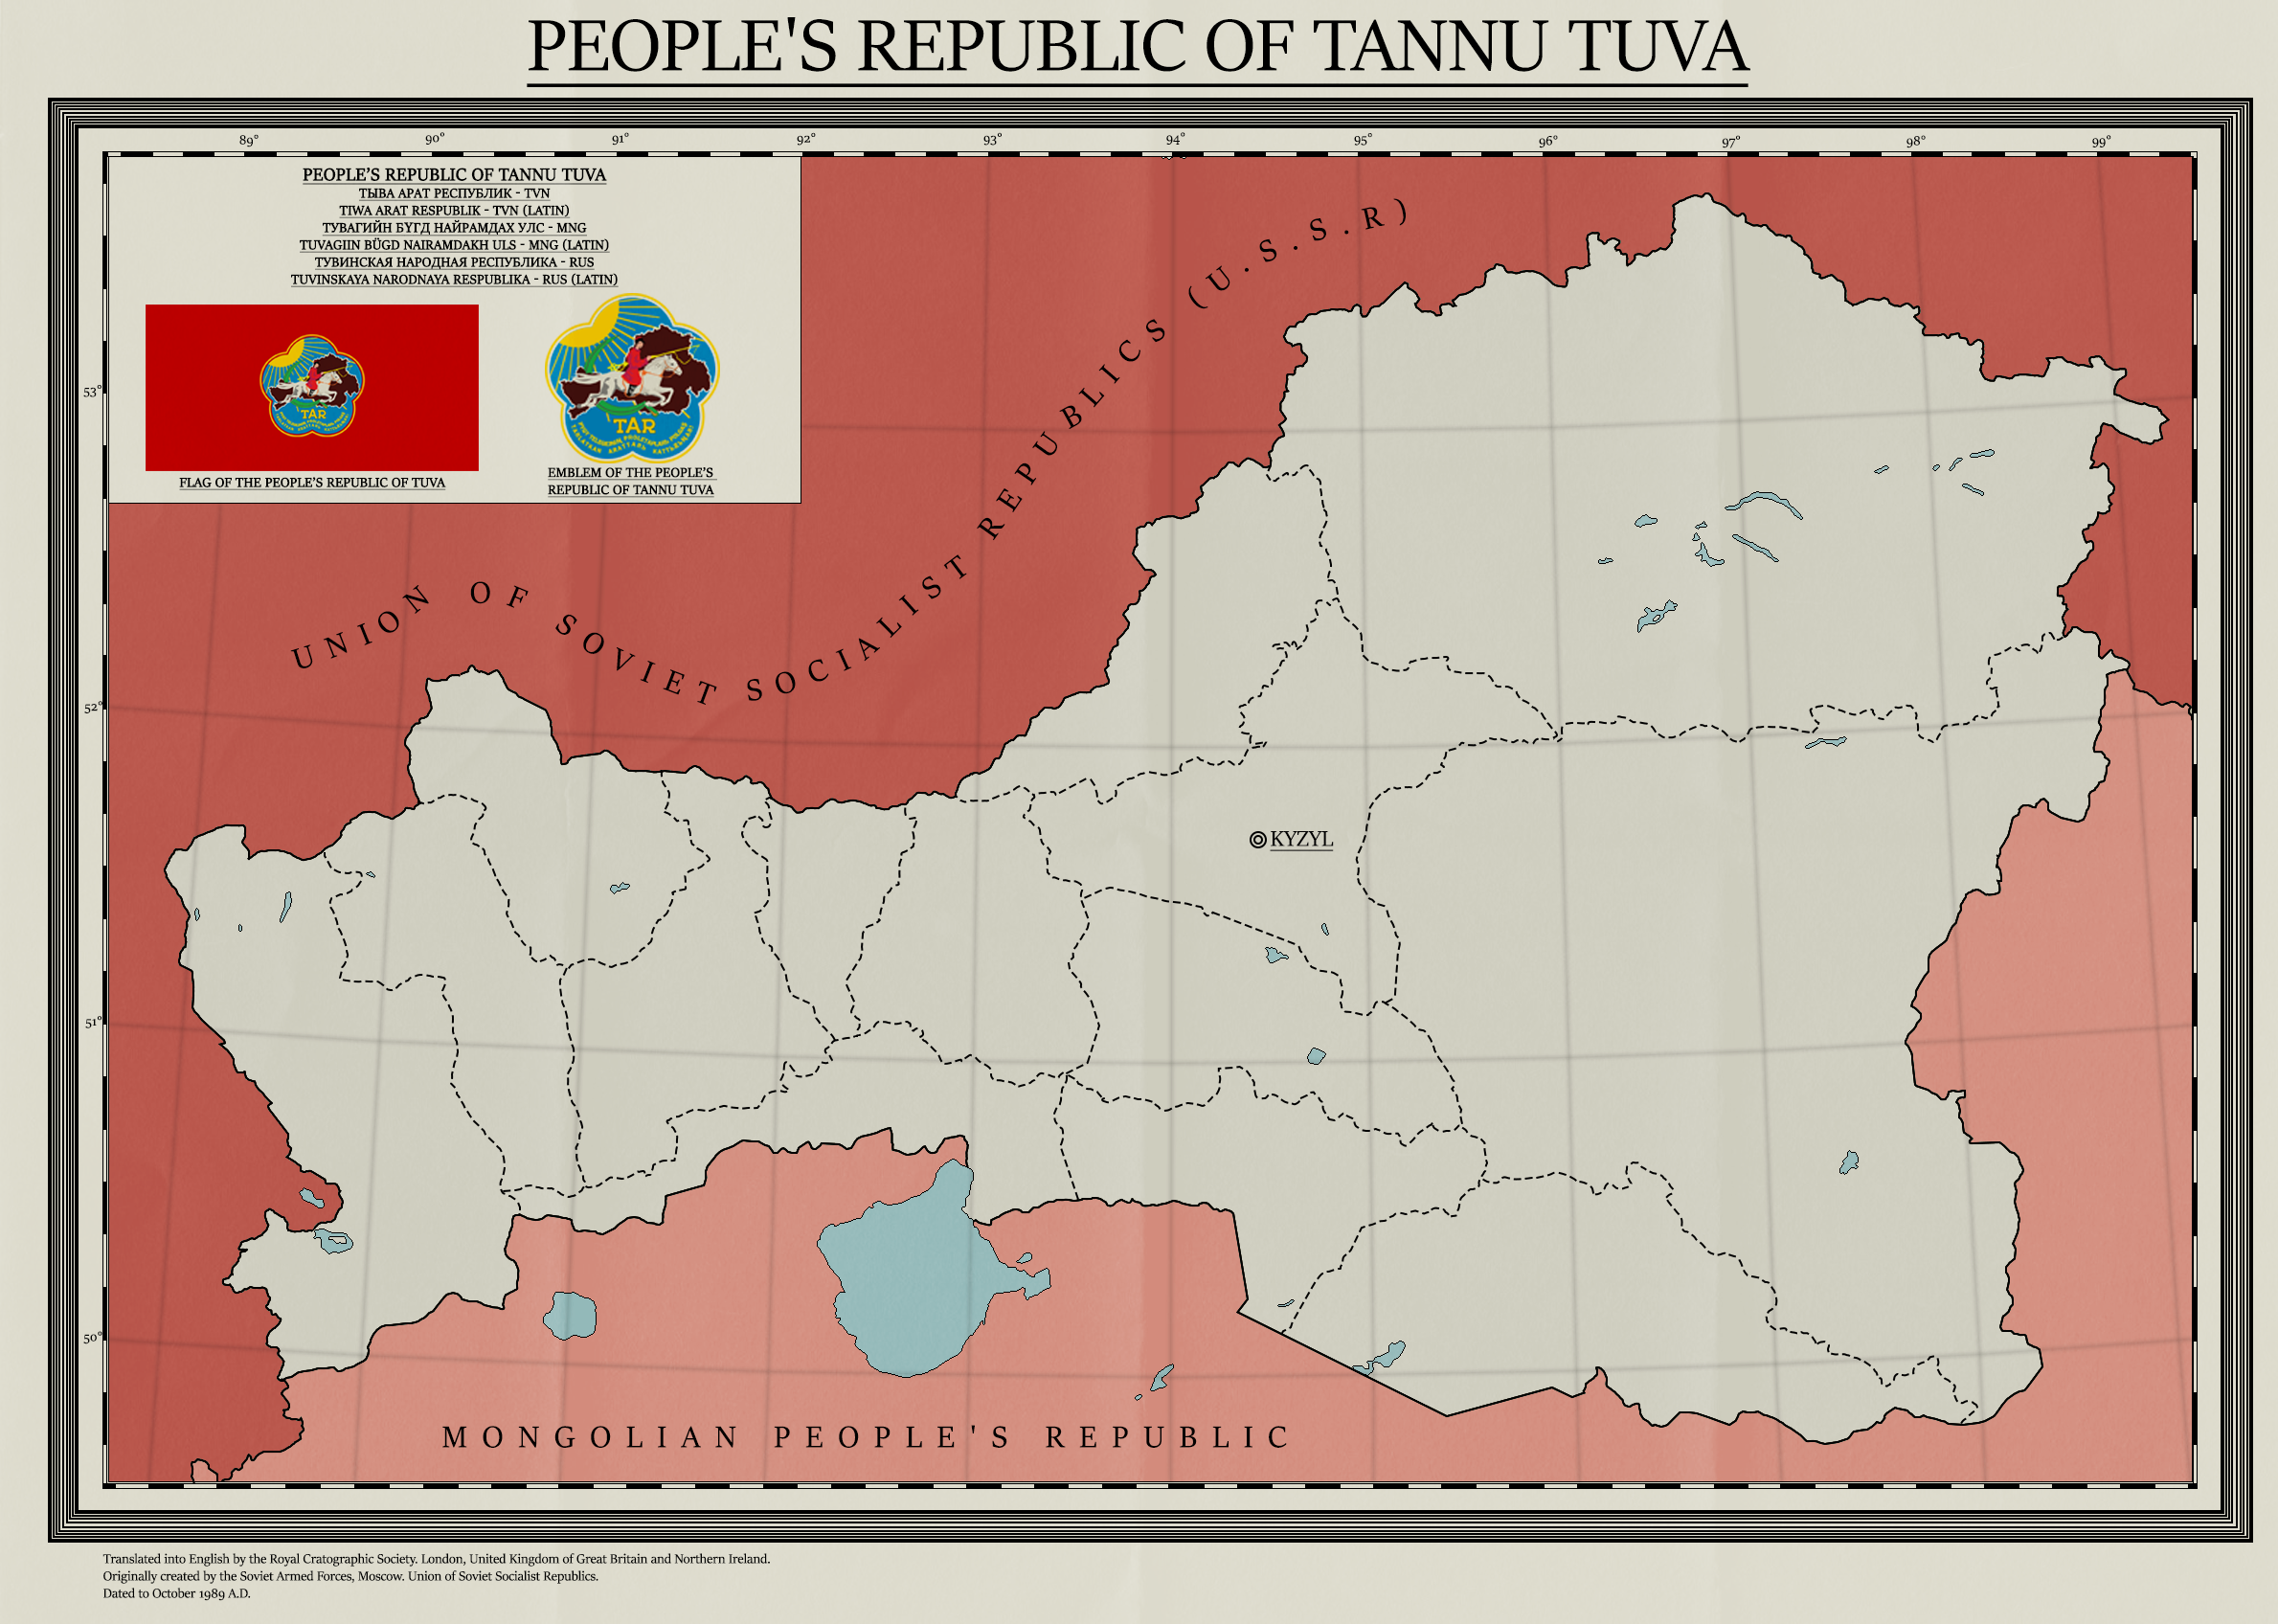 map_of_the_people_s_republic_of_tannu_tuva__1989__by_kitfisto1997-dbs6lna.png